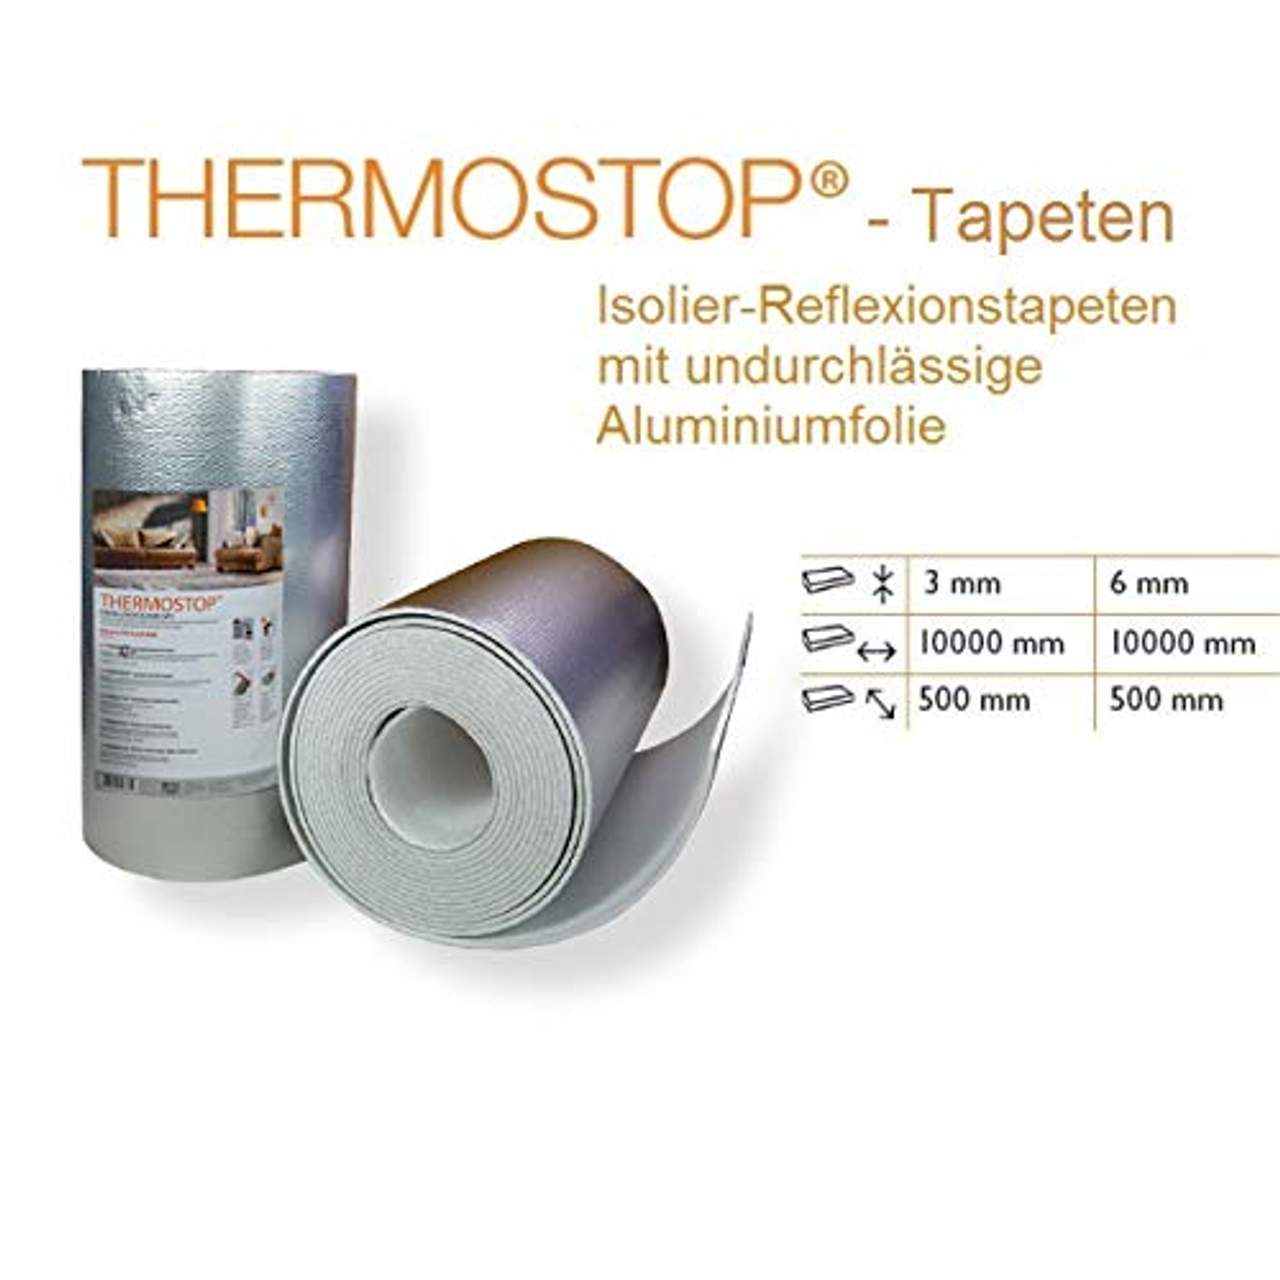 5 qm Reflexionstapete Thermo-Stop 3 Isolierung